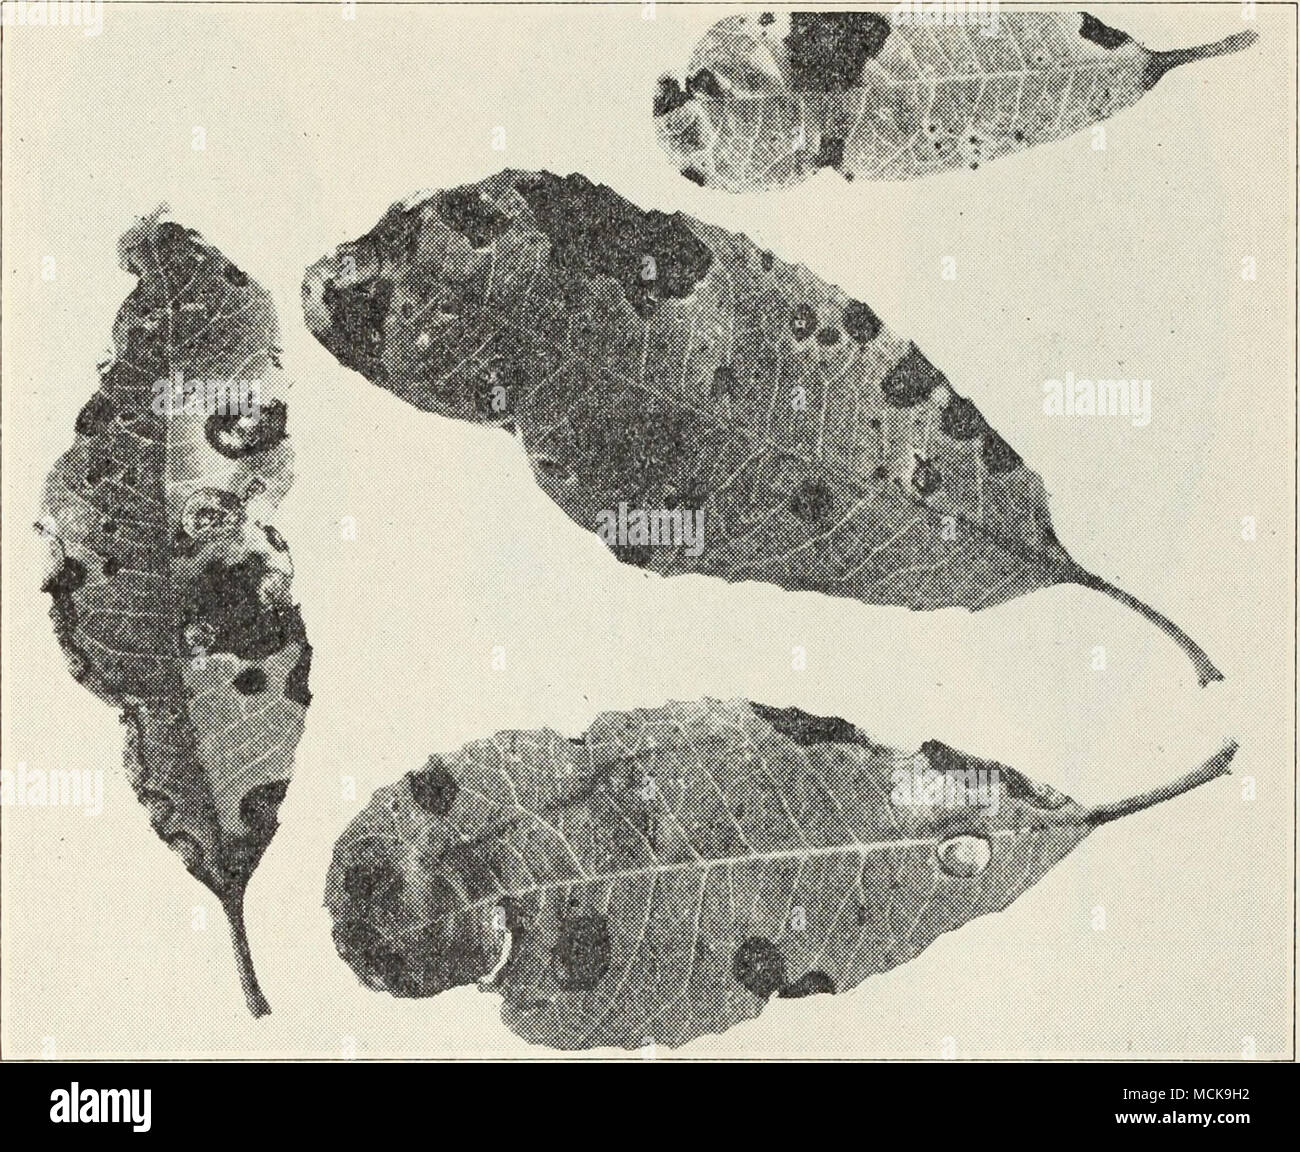 . Fig. 20.—Leaf spot on photinia. be identical in the two hosts. For control see the last section under this plant. Scab.—Small spots of brown, velvety, fungus growth appear on the leaves (fig. 21), flower stalks, and green berries, and disfigure the latter when mature. This fungus, Fusicladium photinicola, is very similar to those causing scab on apple, pear, loquat, and other pomaceous hosts, but the ones on different hosts appear to be of different species, so that cross-infection does not occur. For control see the last section under this plant. Thrips Effect.—A bad stunting, curling, and  Stock Photo